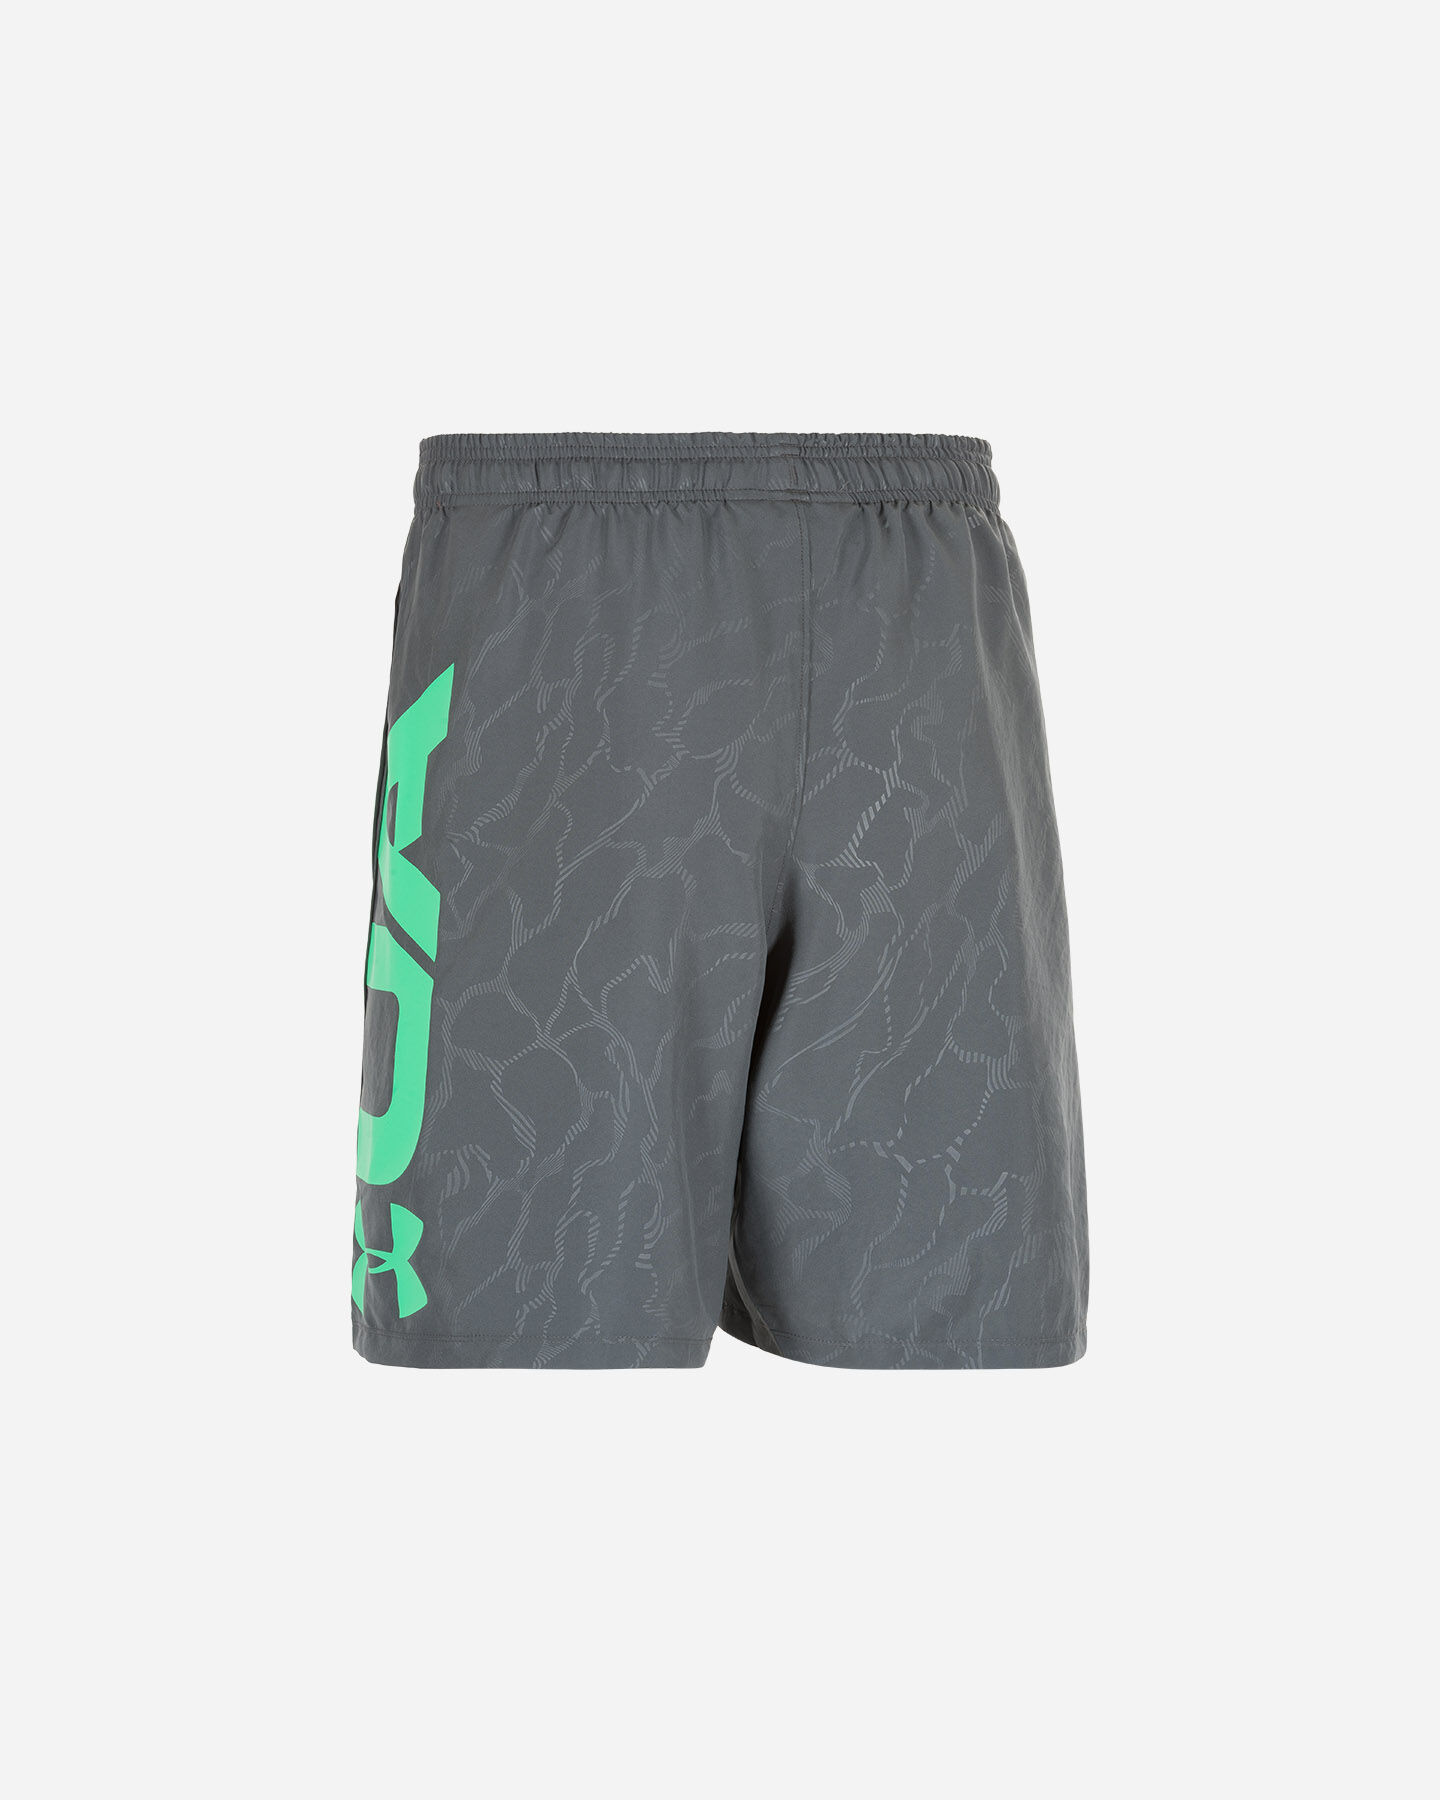  Pantalone training UNDER ARMOUR GRAPHIC EMBOSS M S5169145|0012|SM scatto 1